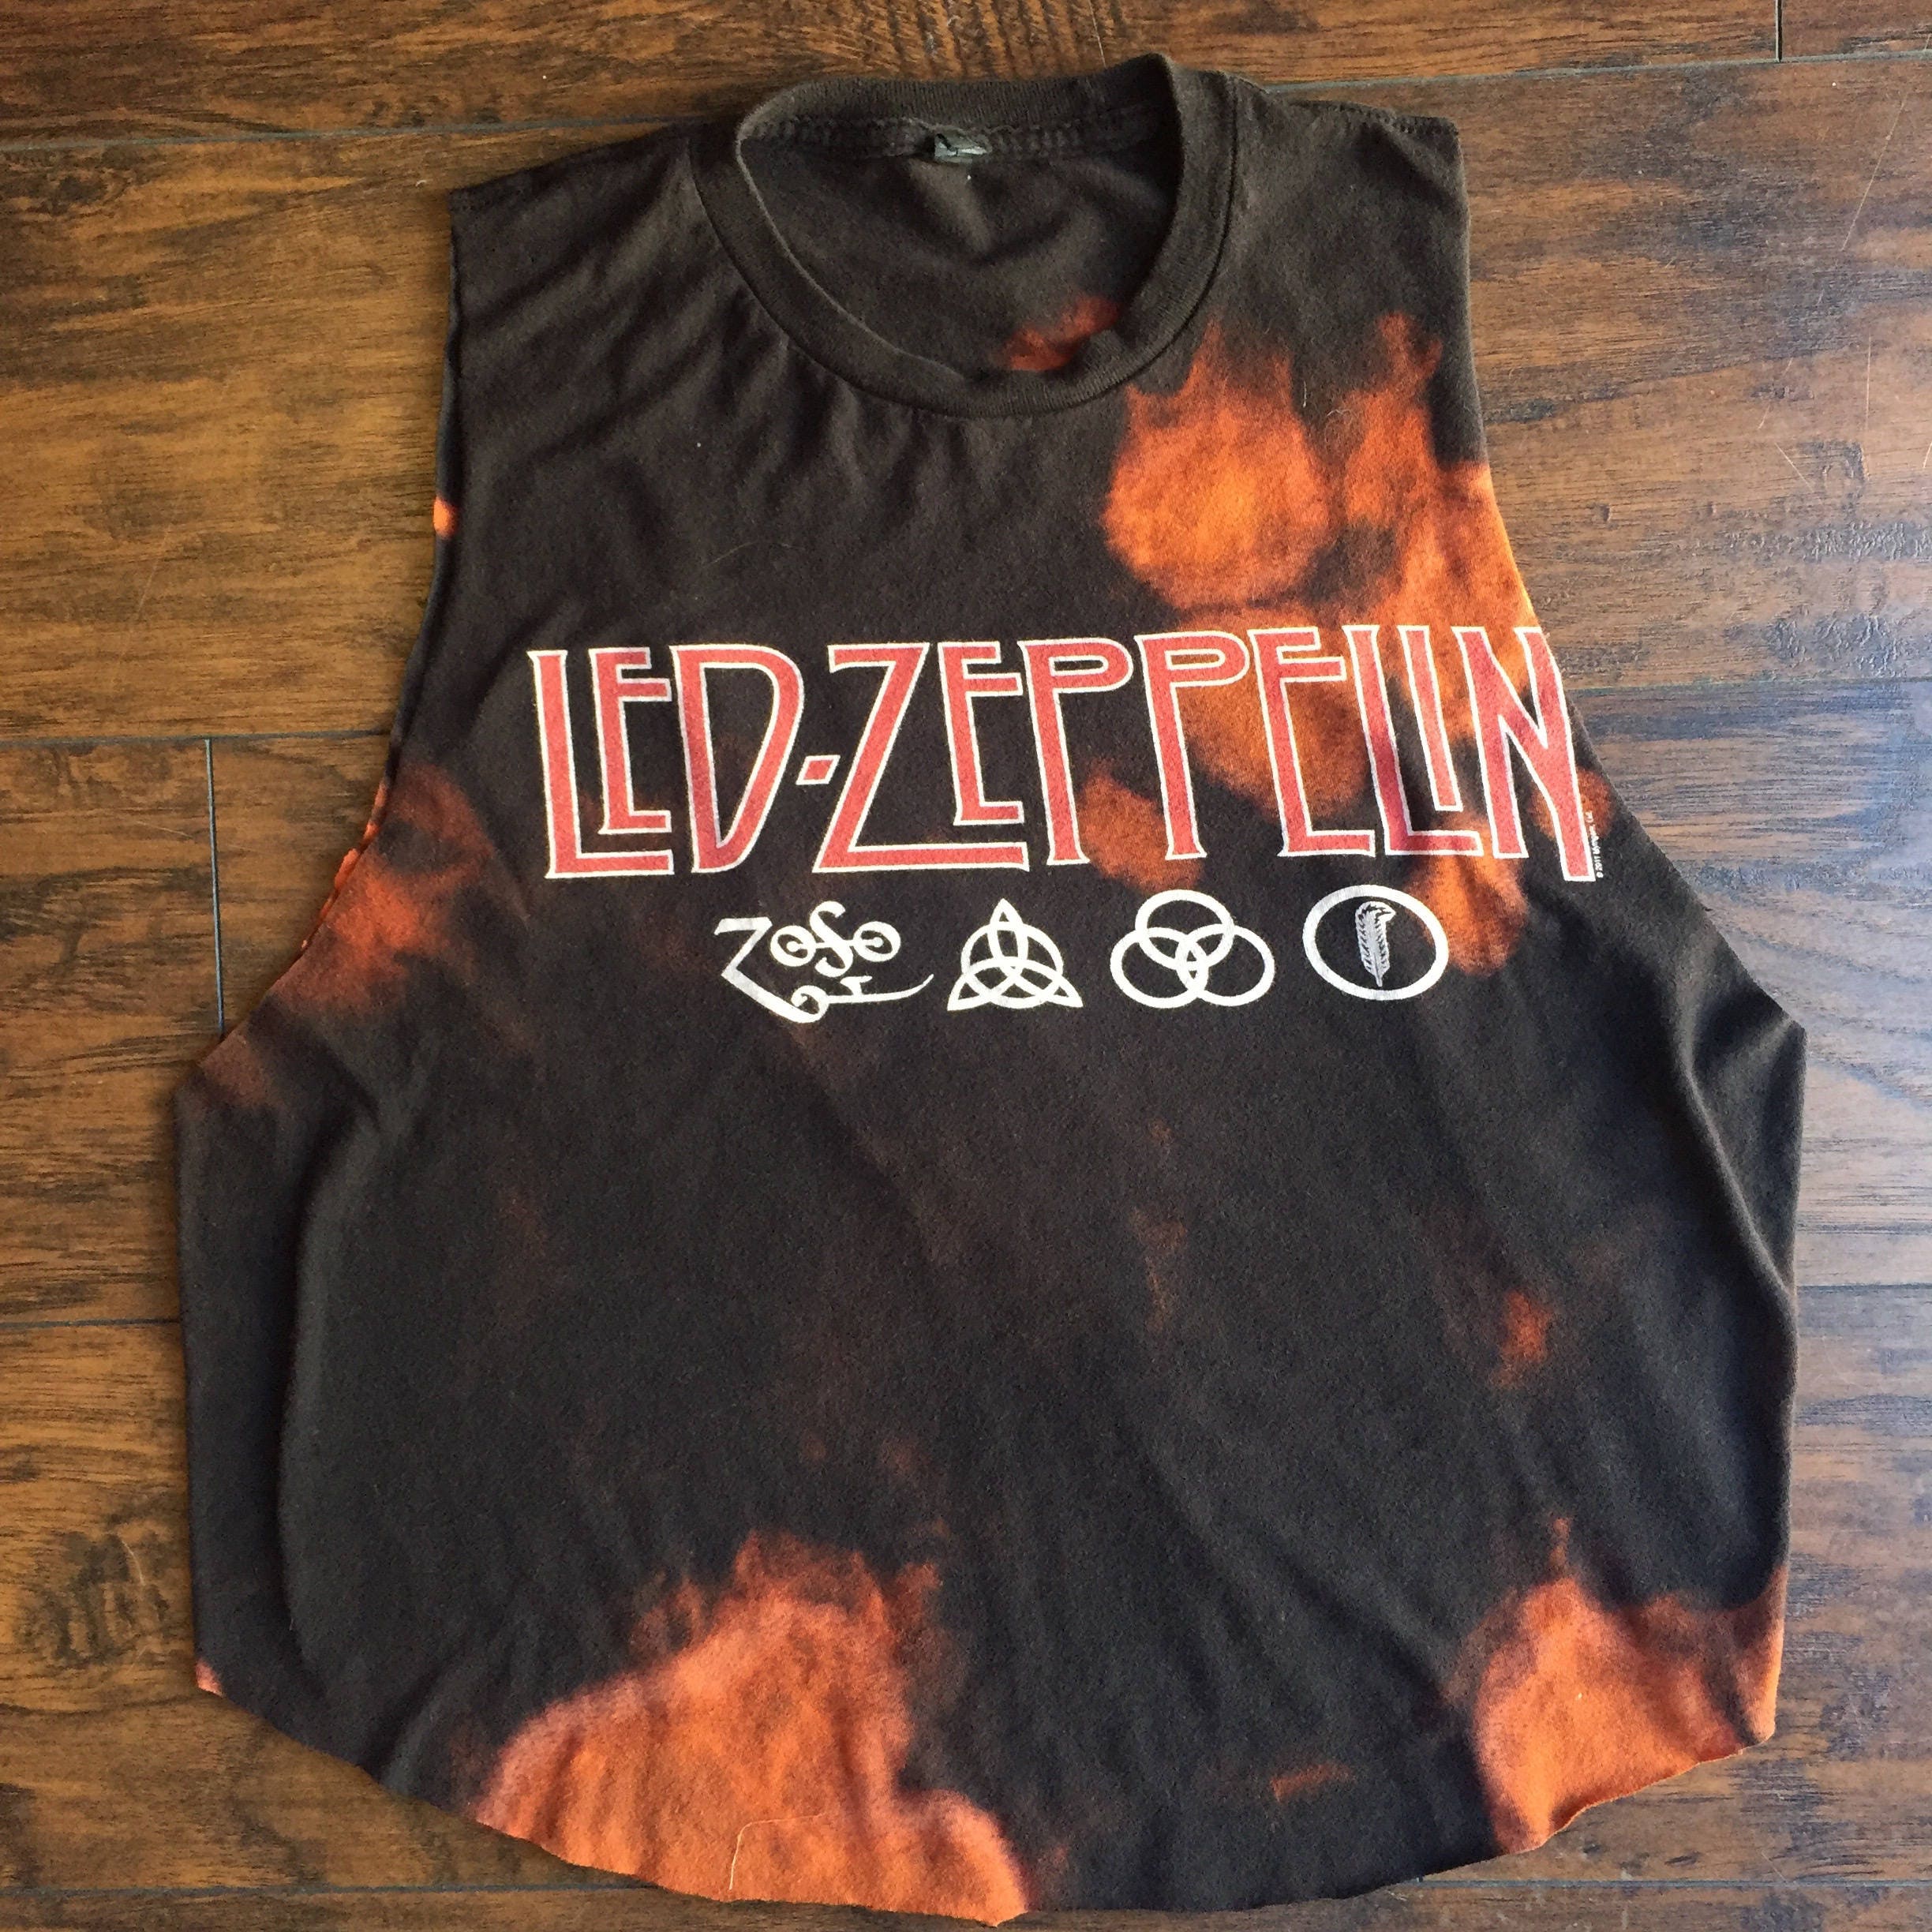 Led Zeppelin hand distressed one of a kind acid washed tie dye tank top ...